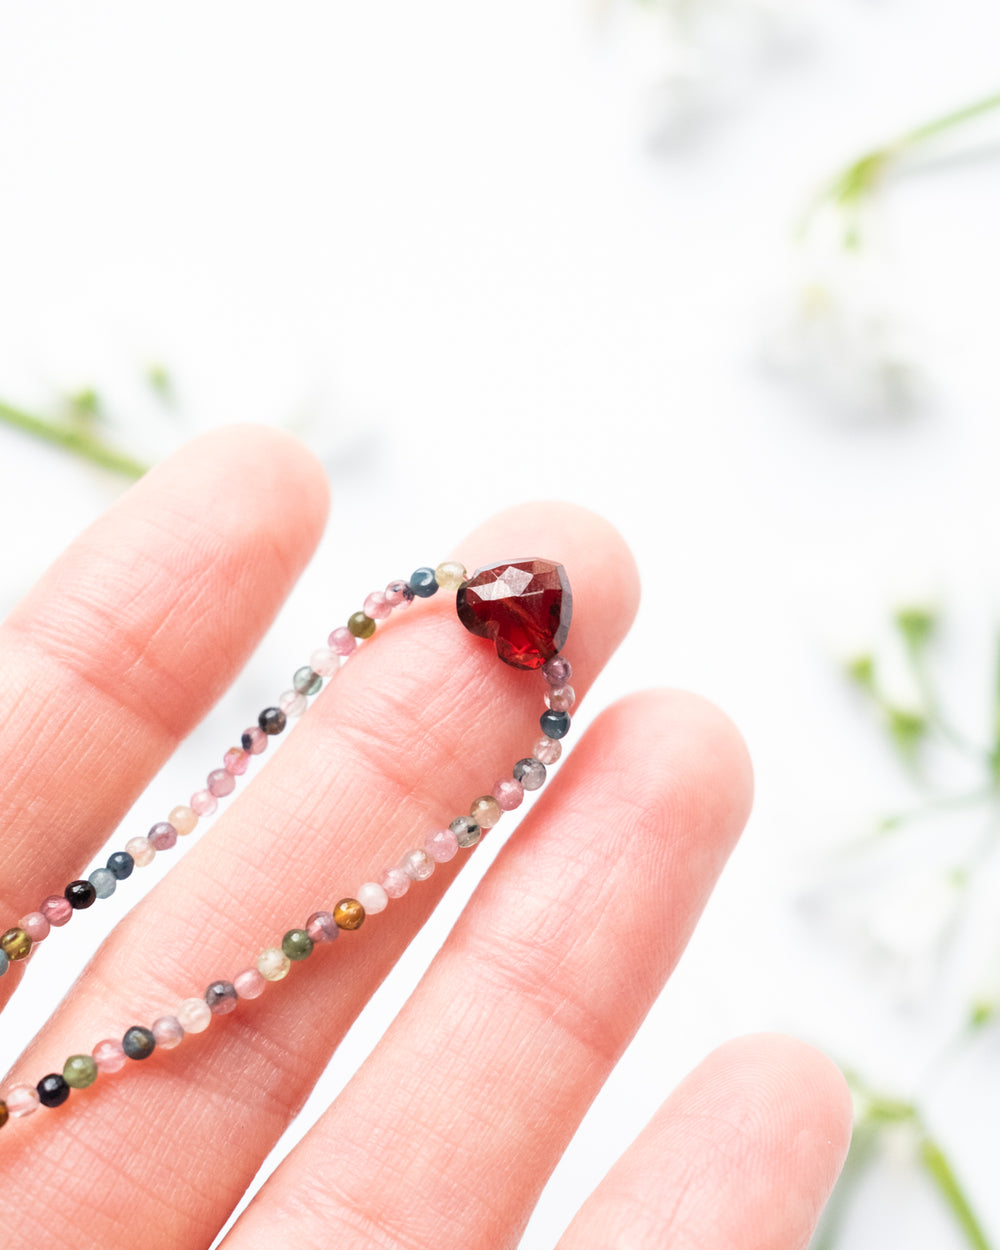 Mozambique Red Garnet Beaded Necklace - The Healing Pear